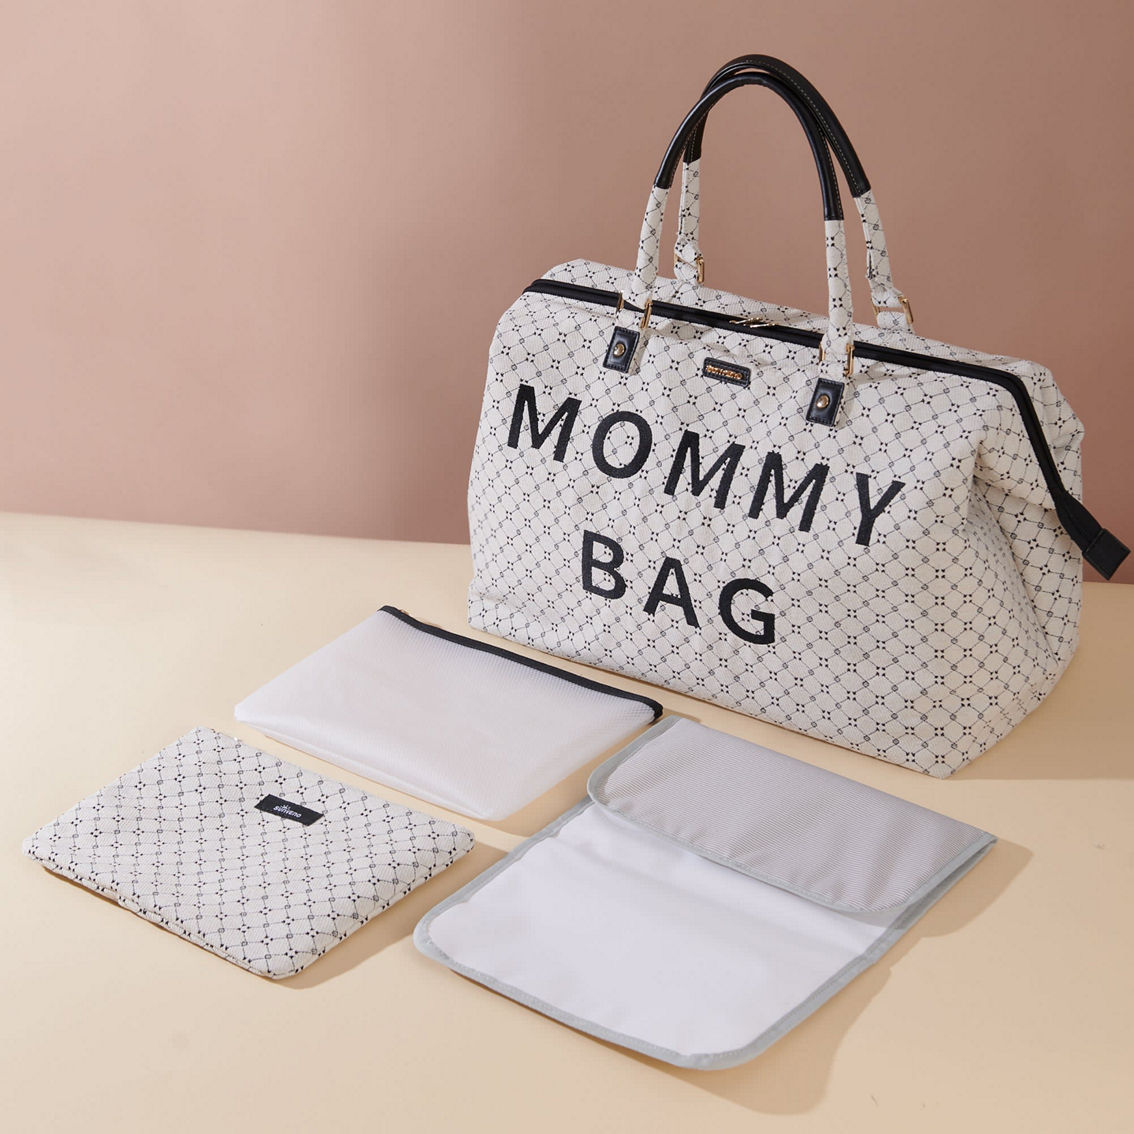 Sunveno Mommy Bag Weekender Bags - Image 3 of 5